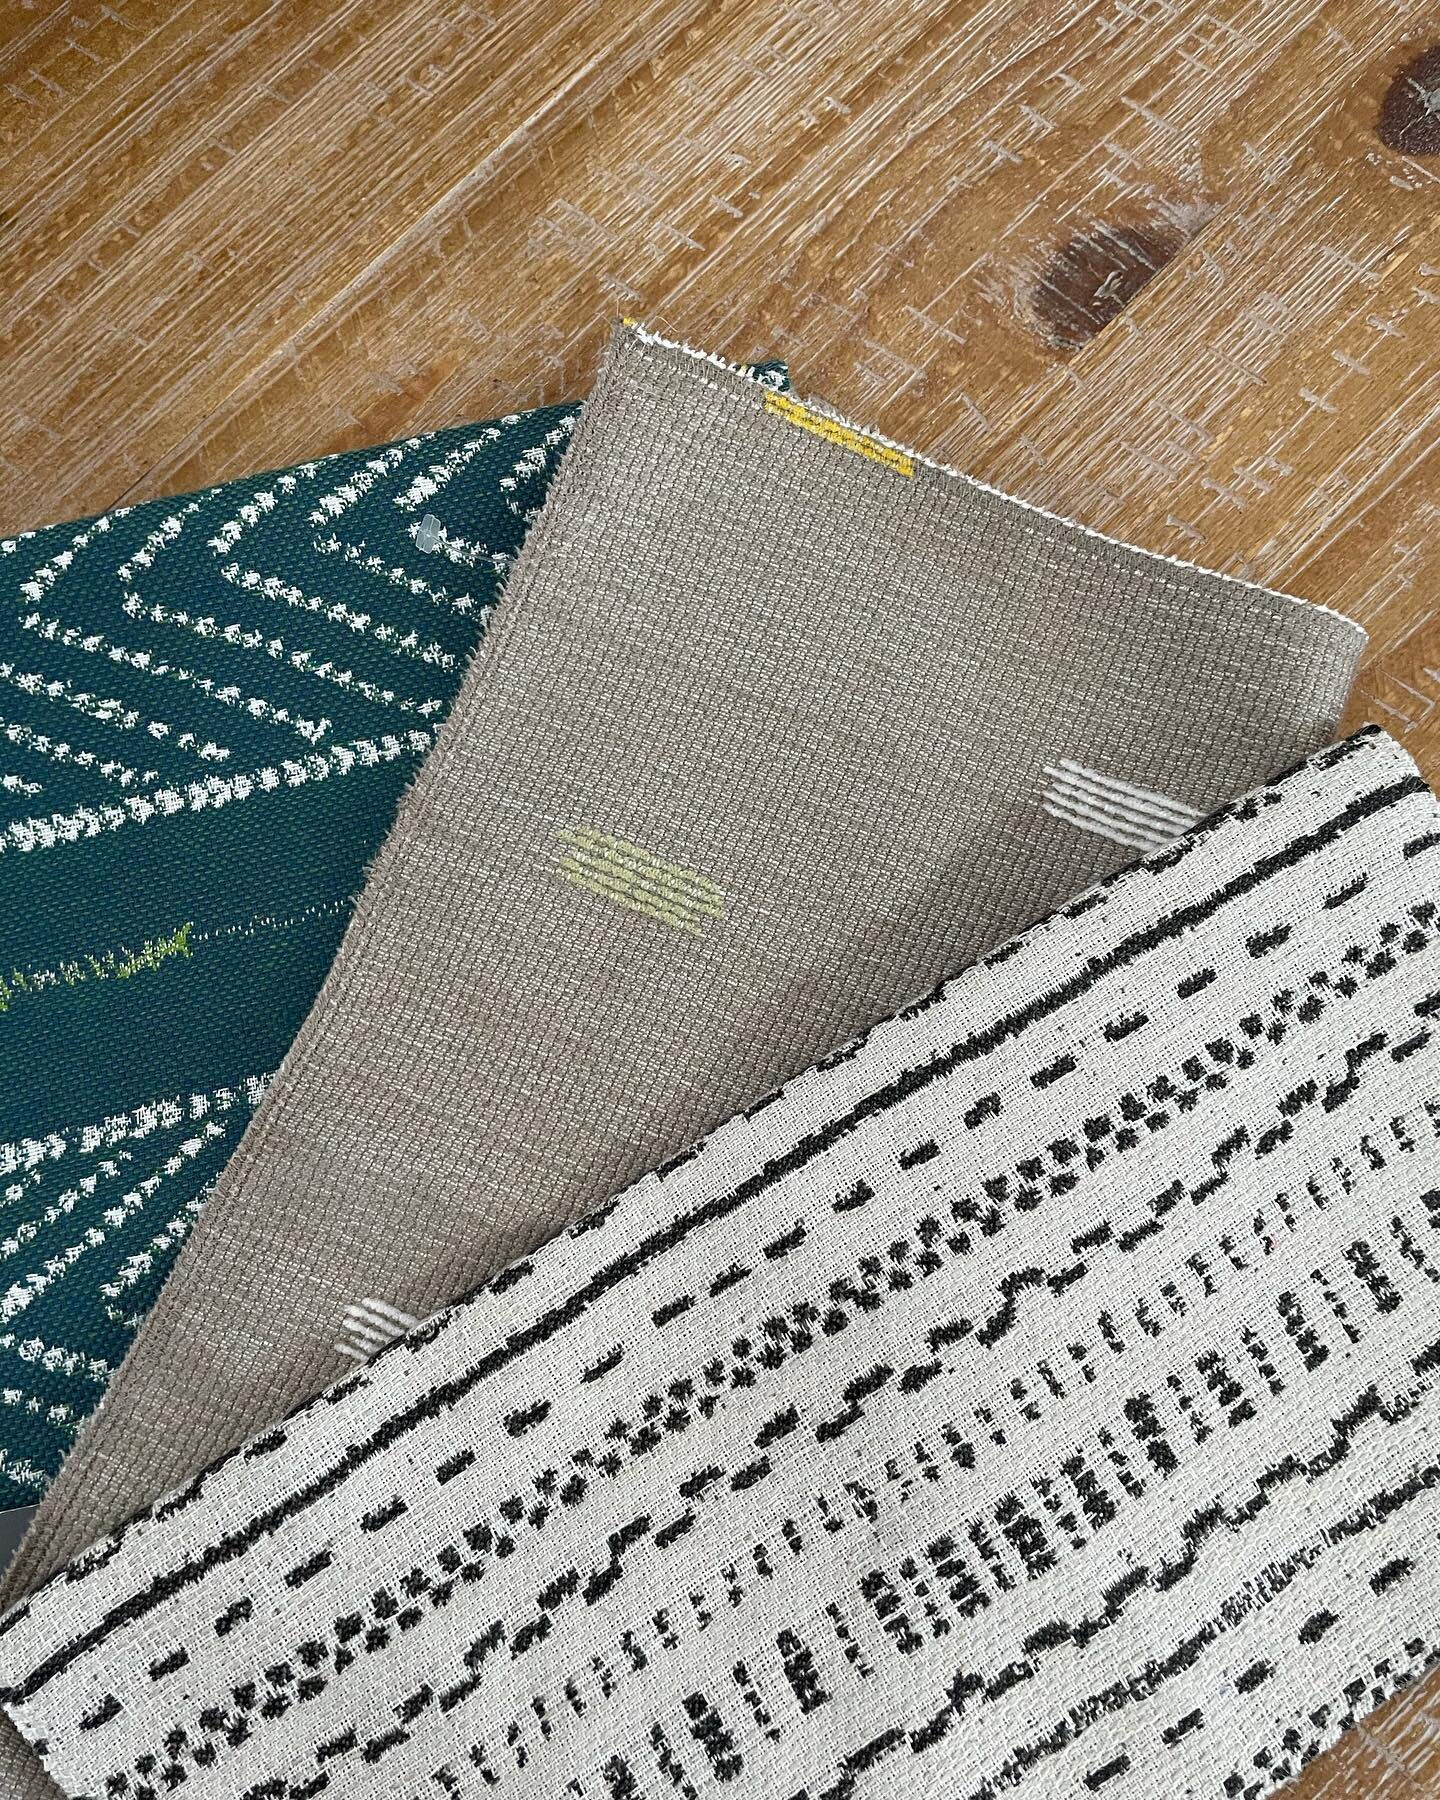 Things are heating up here in the desert!  We love the wide variety of outdoor fabrics from @pindler that won't fade from the sun. DM or email us at hello@soleilstudiodesign.com to set up a consultation to give your outdoor space a summer refresh. ☀️